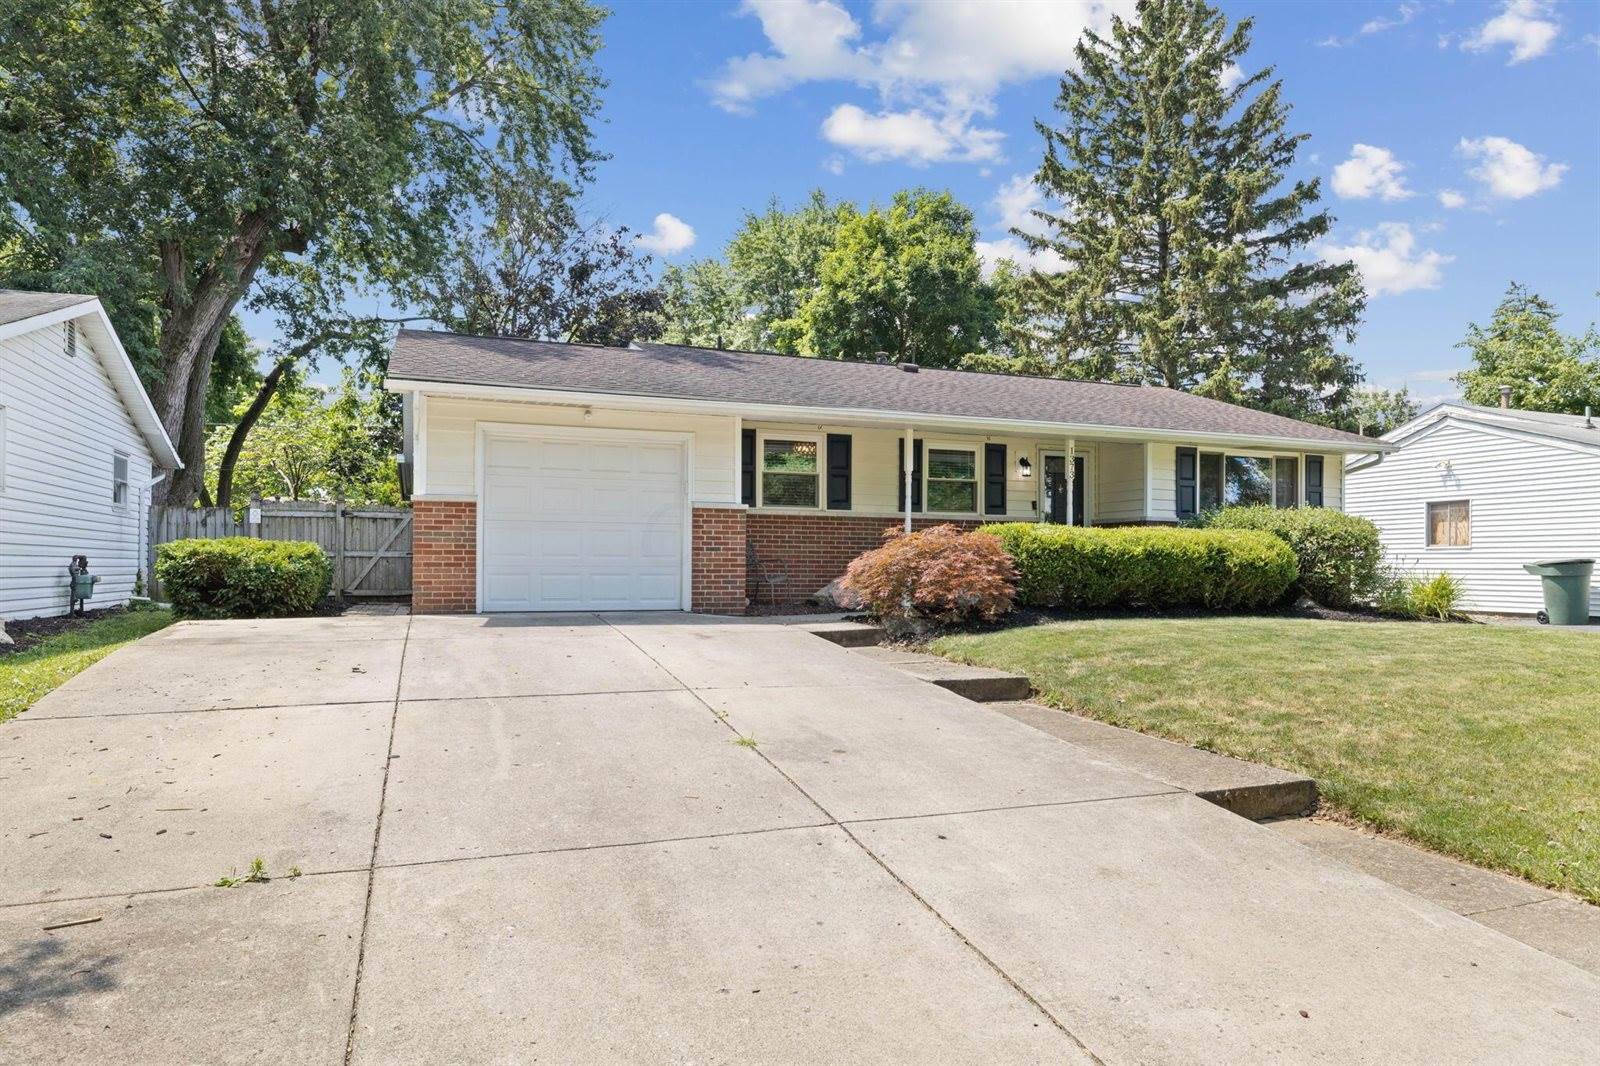 1373 Chesterton Square South, Columbus, OH 43229